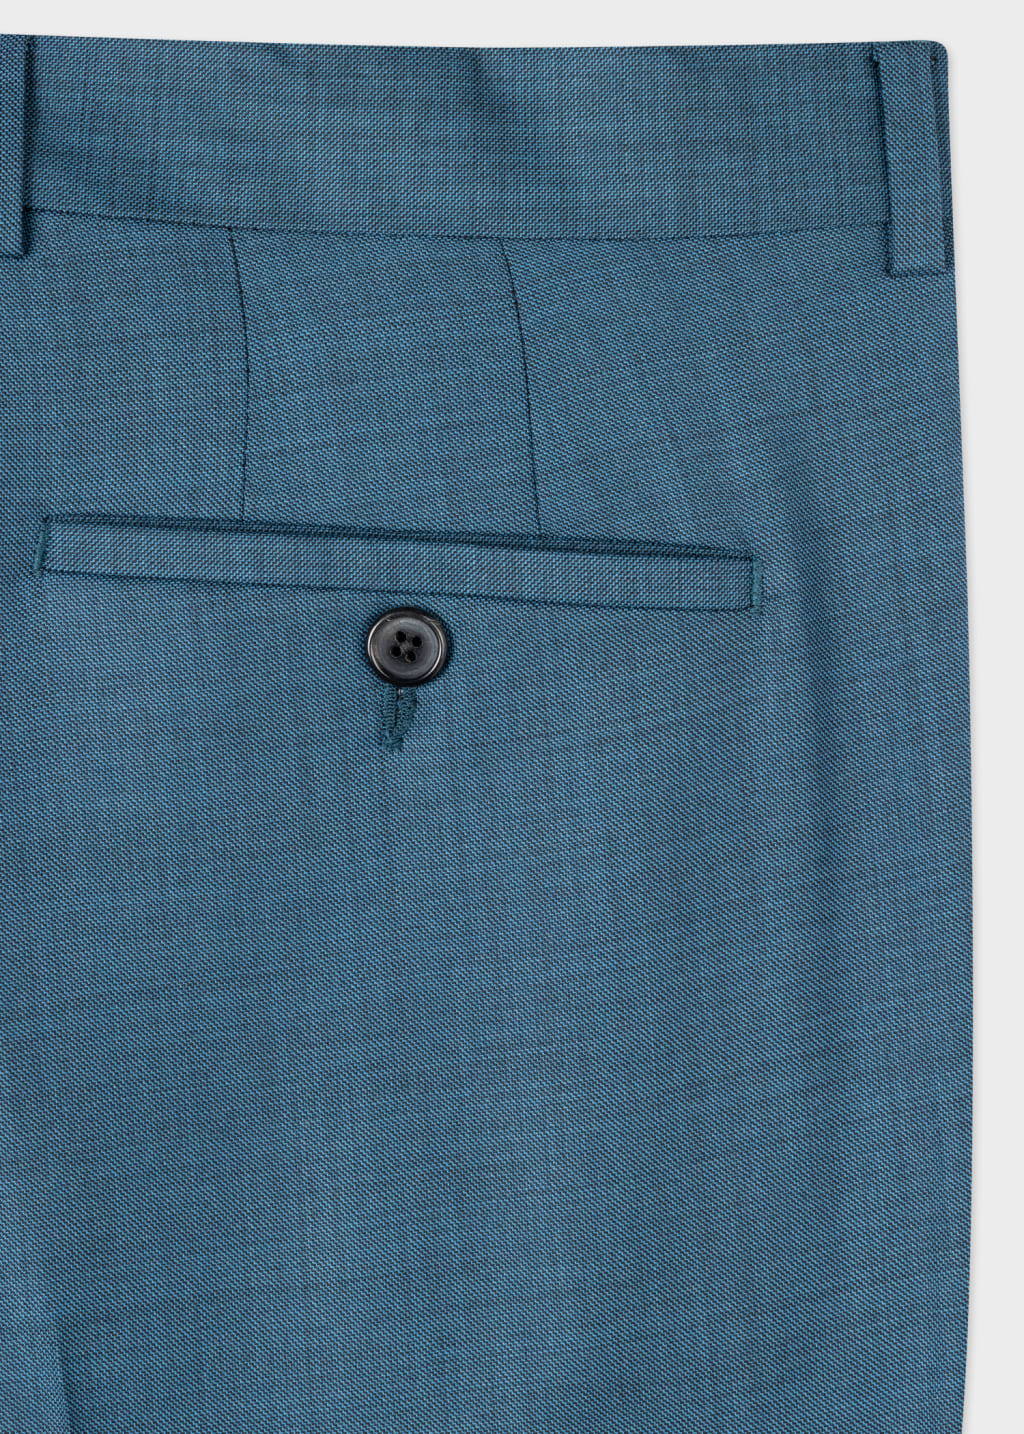 Detail View - The Soho - Tailored-Fit Teal Sharkskin Wool Suit Paul Smith